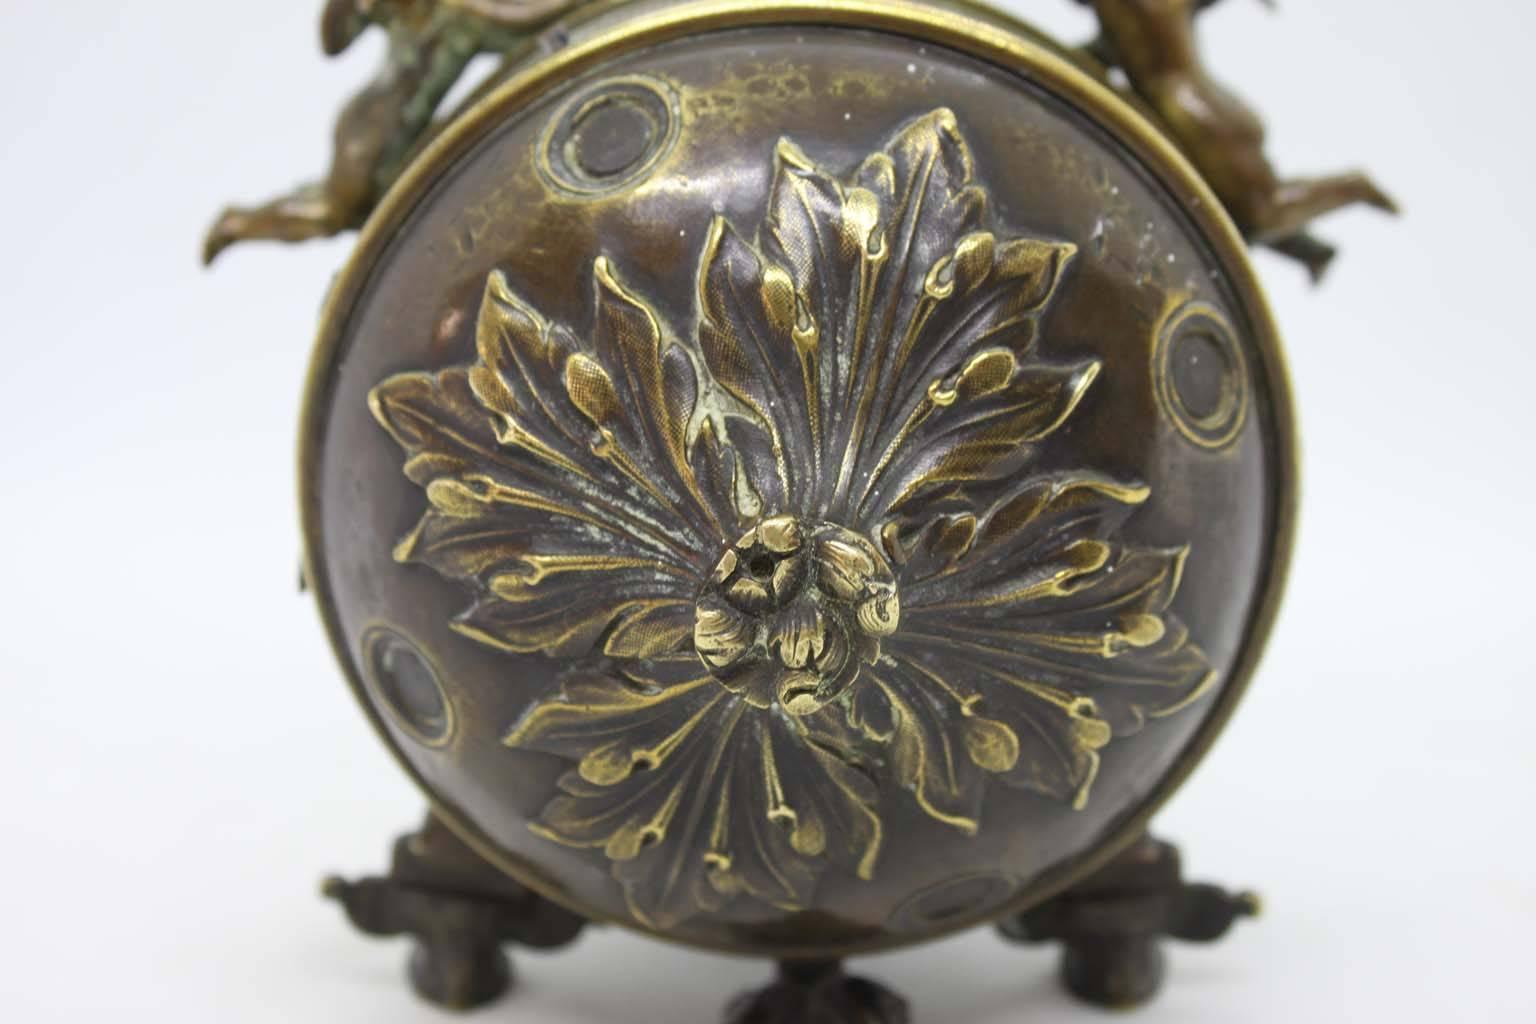 Bronze Late 18th Century Small Round Clock by Isaac Soret & Fils